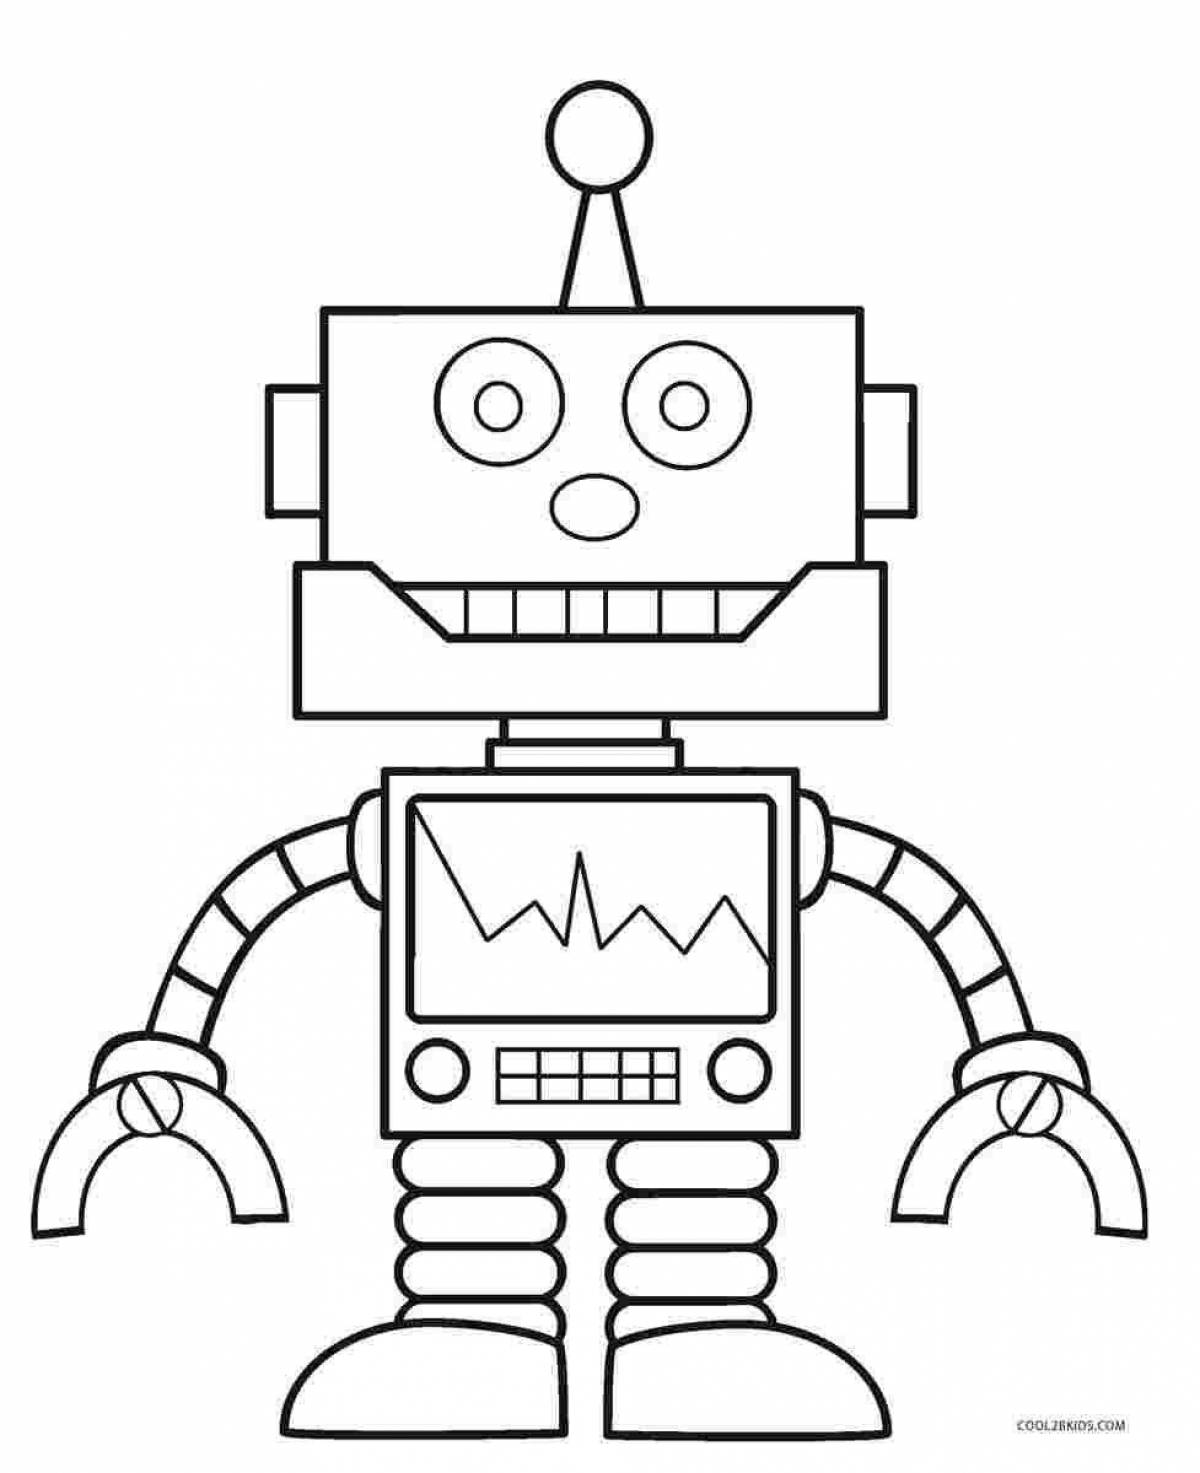 Vivid robot coloring page for kids